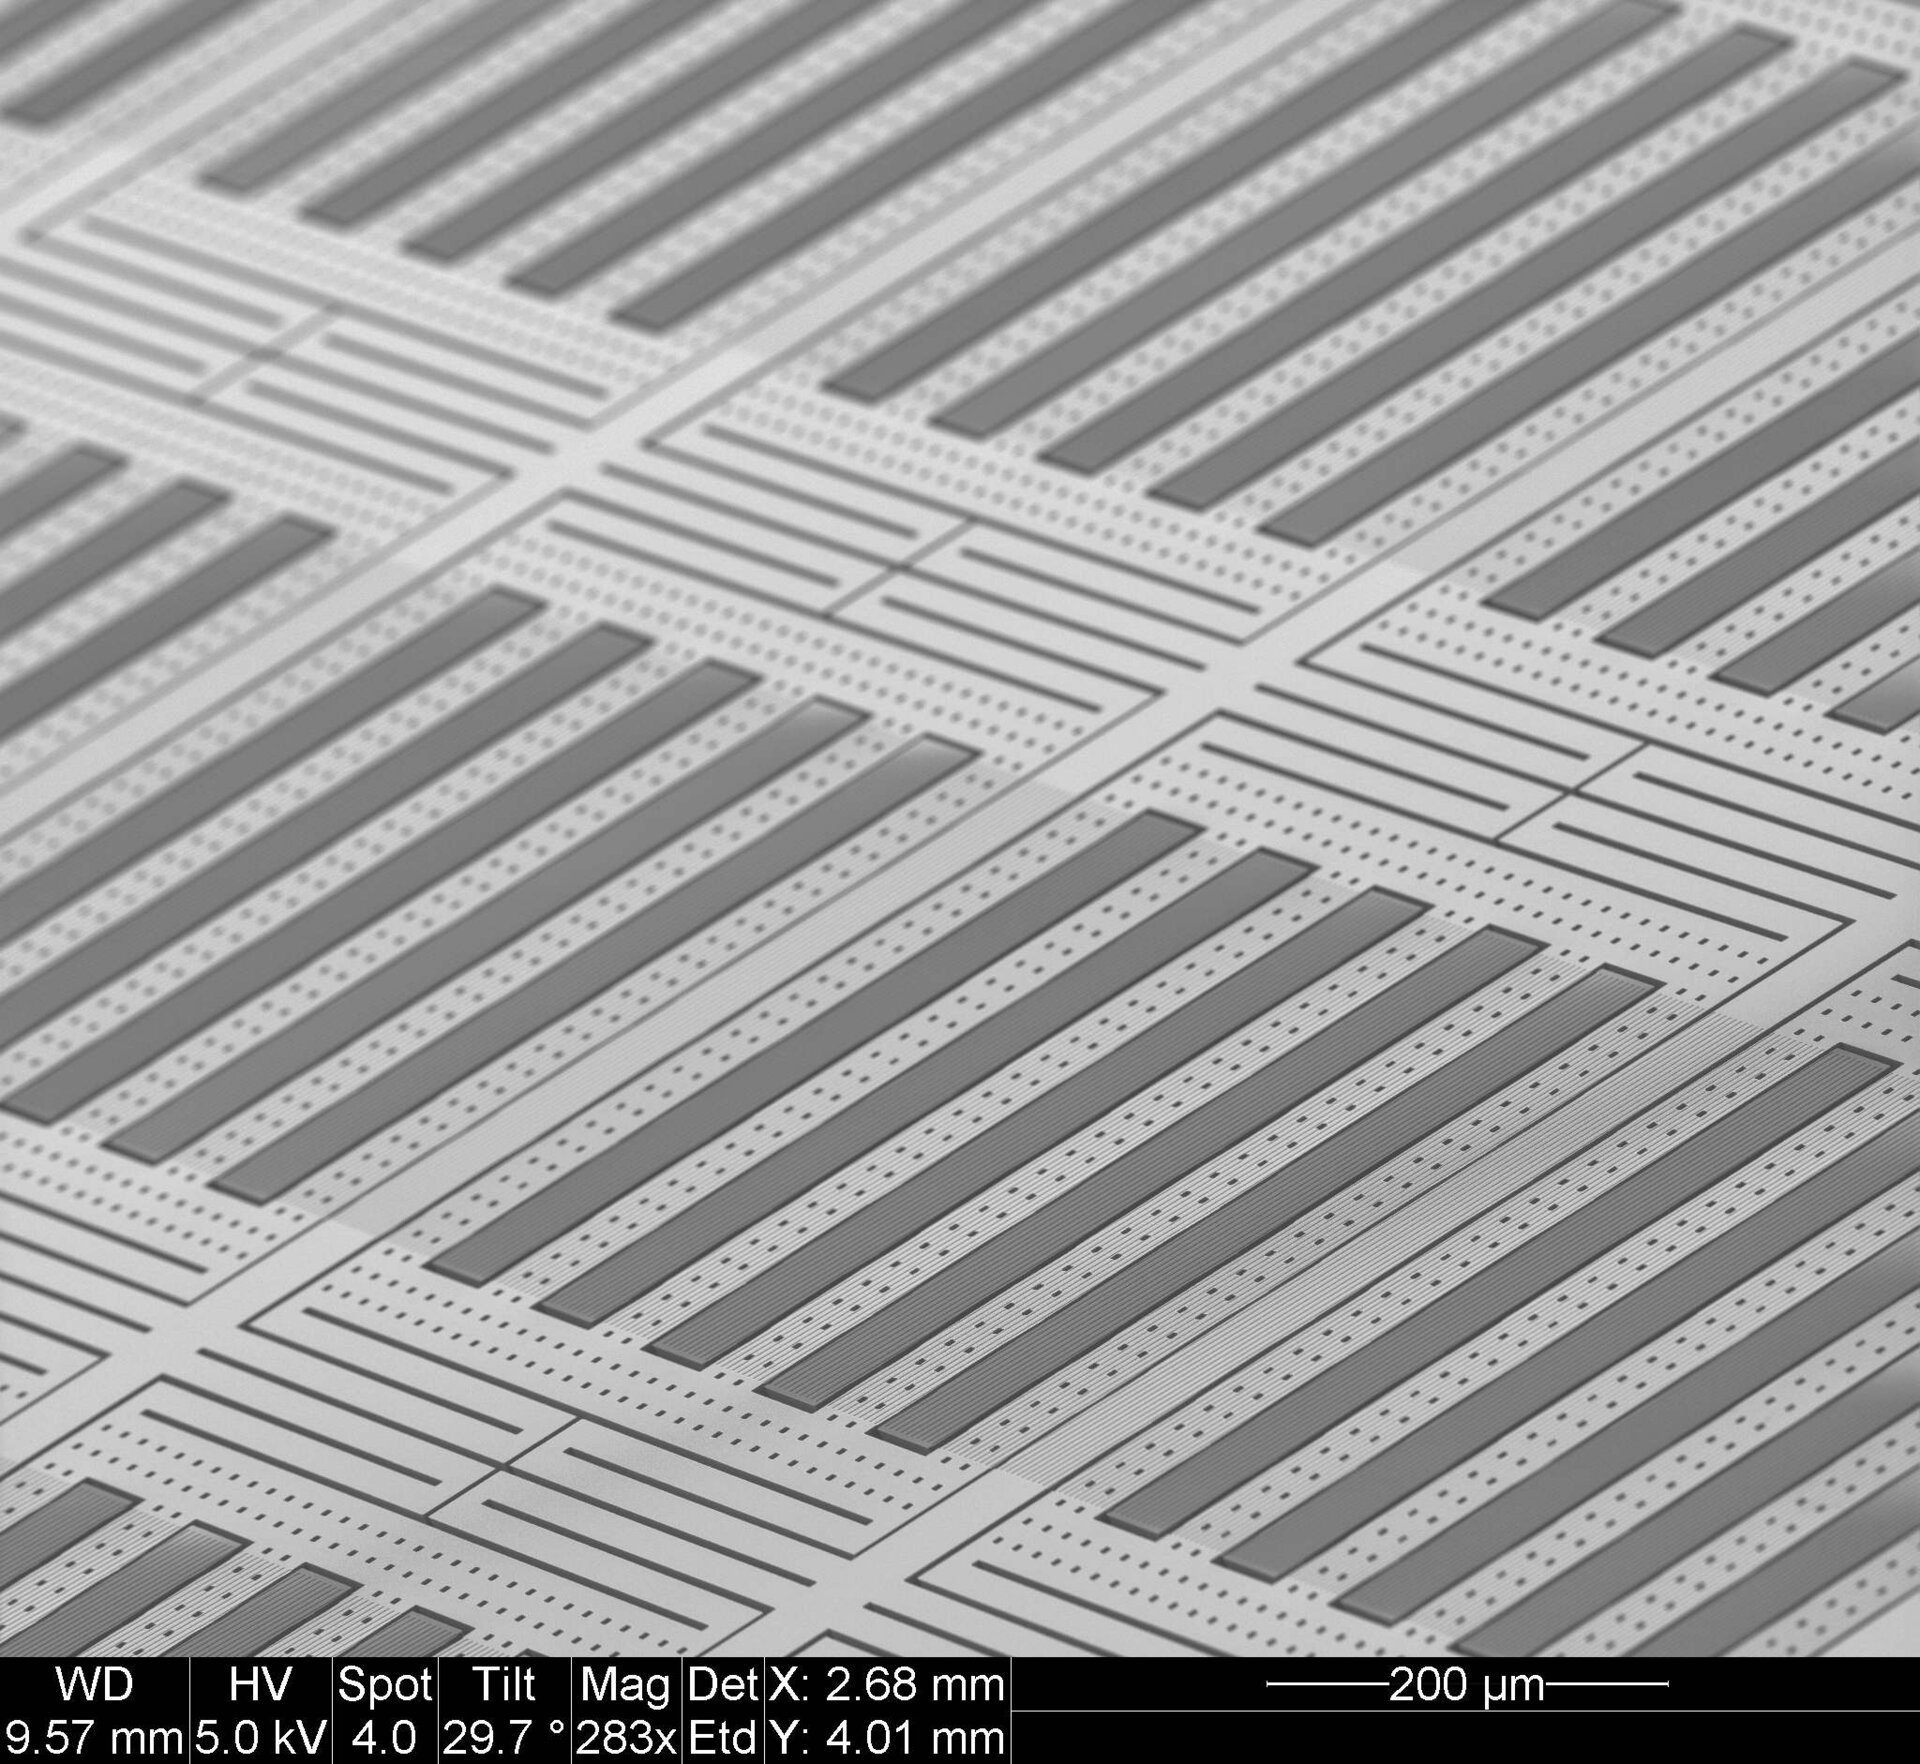 Microscopic view of the CDOE gratings